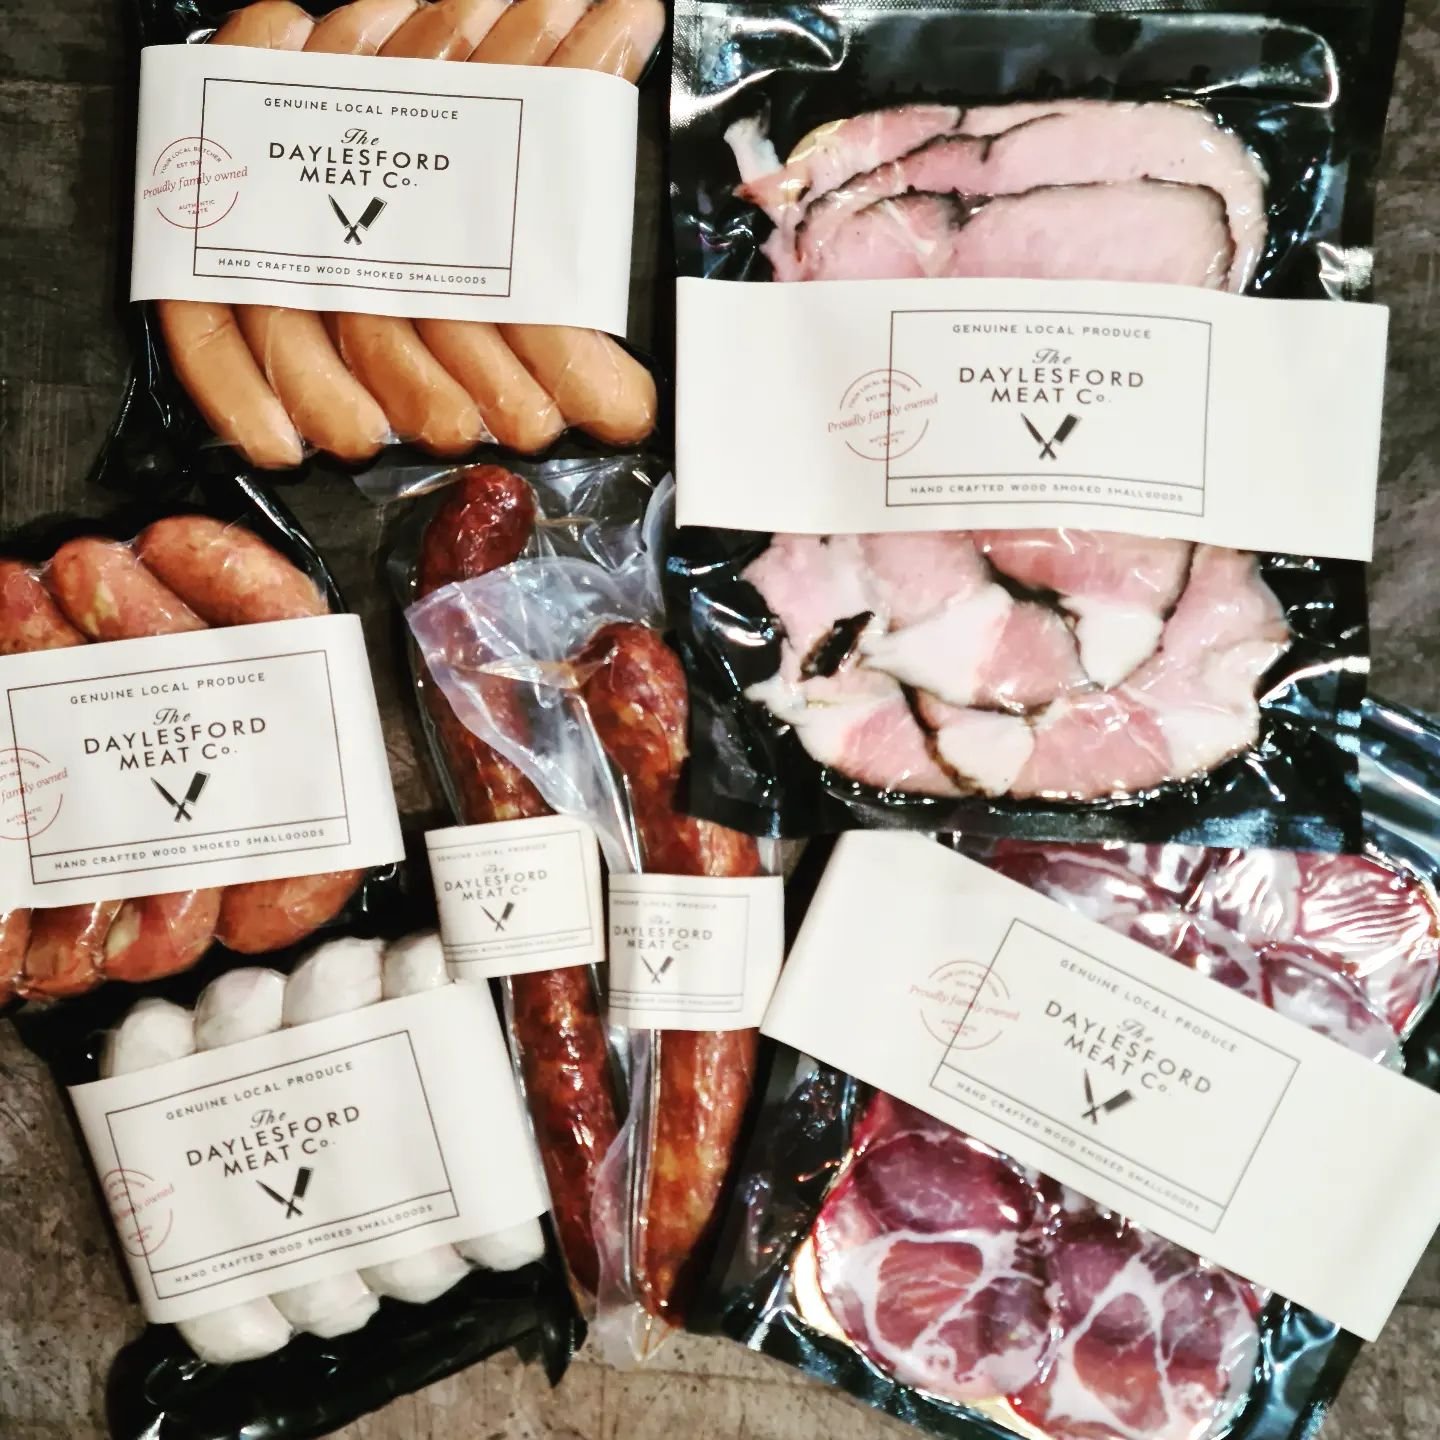 Our collaboration with @oakwoodsmallgoods has arrived, ready to enjoy in store today!